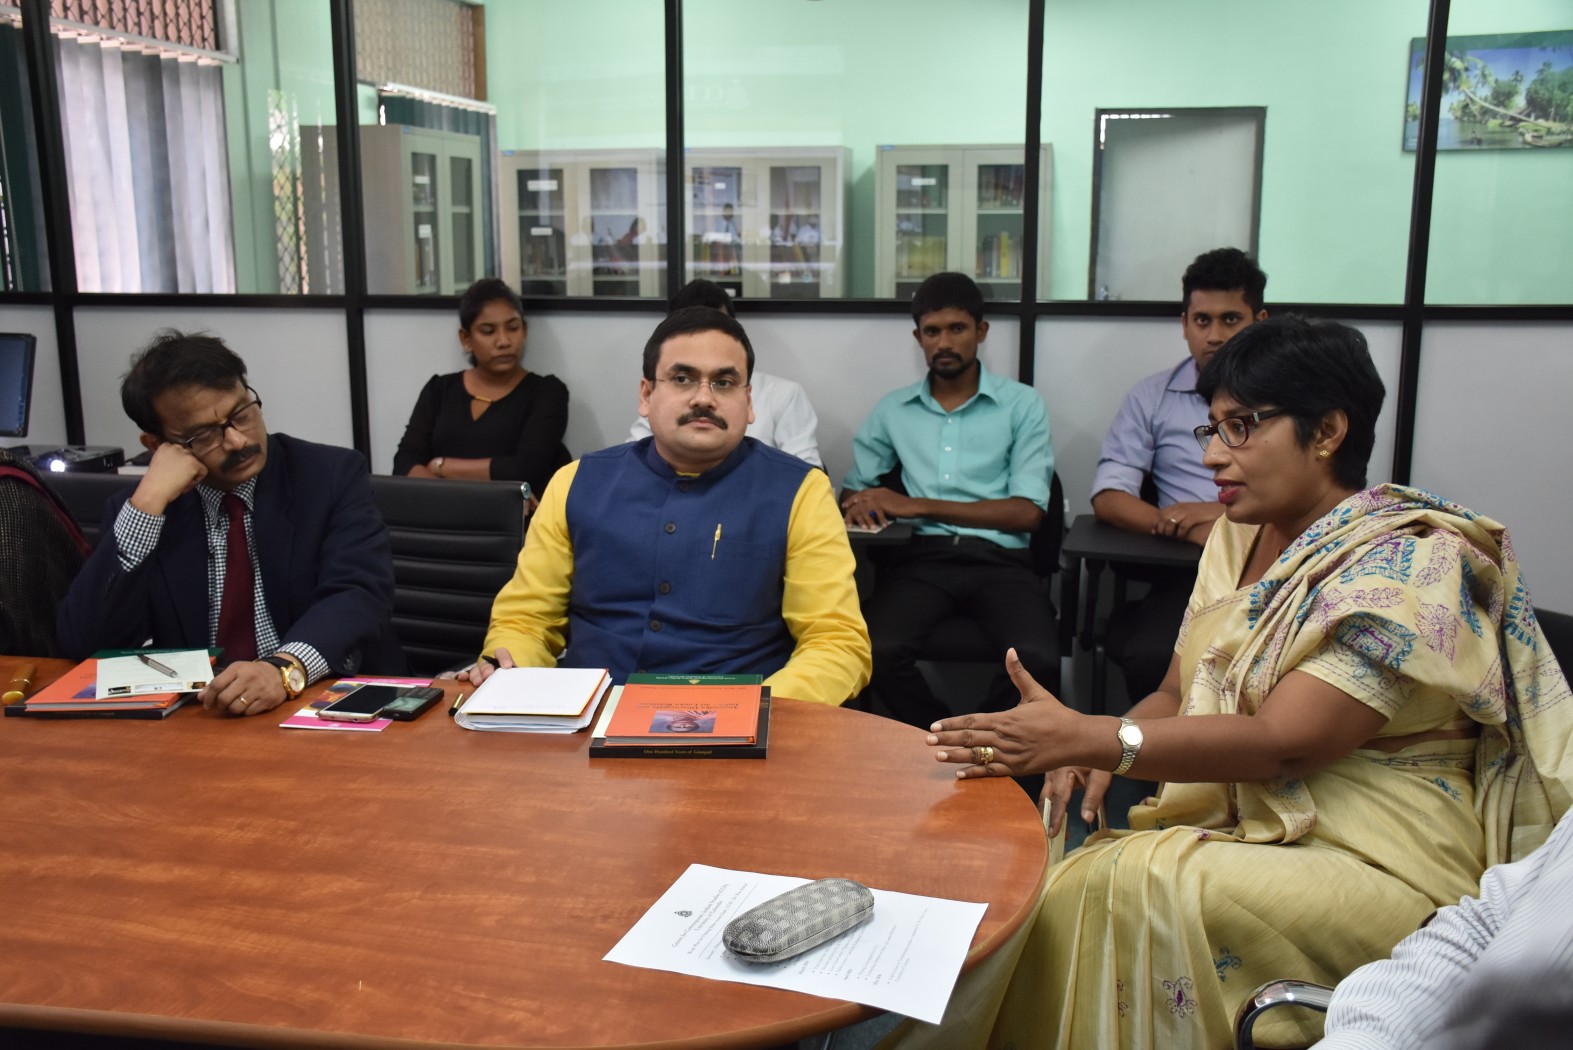 ICCR visited University of Colombo5